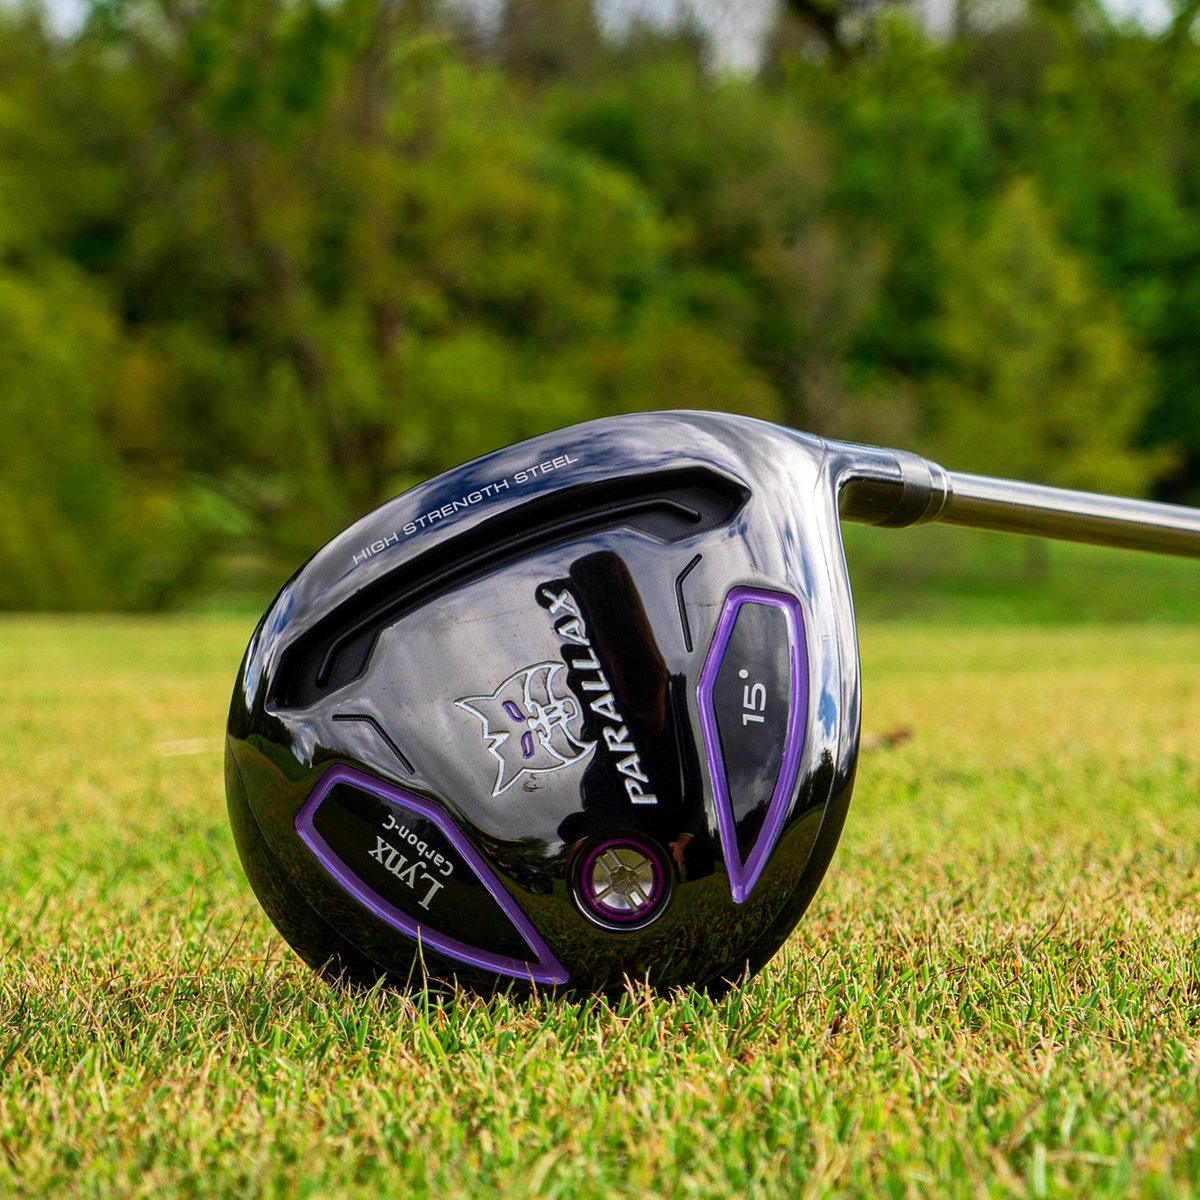 Unleash precision with our Silver Cat Fairway Woods!🏌🏻‍♀️💜 Featuring BiTitanium construction, a high gloss mirror finish, and a power channel for ultimate performance. Get yours for only £175 each at lynxgolf.co.uk✨ #LynxGolf #SilverCatWoods #GolfGear